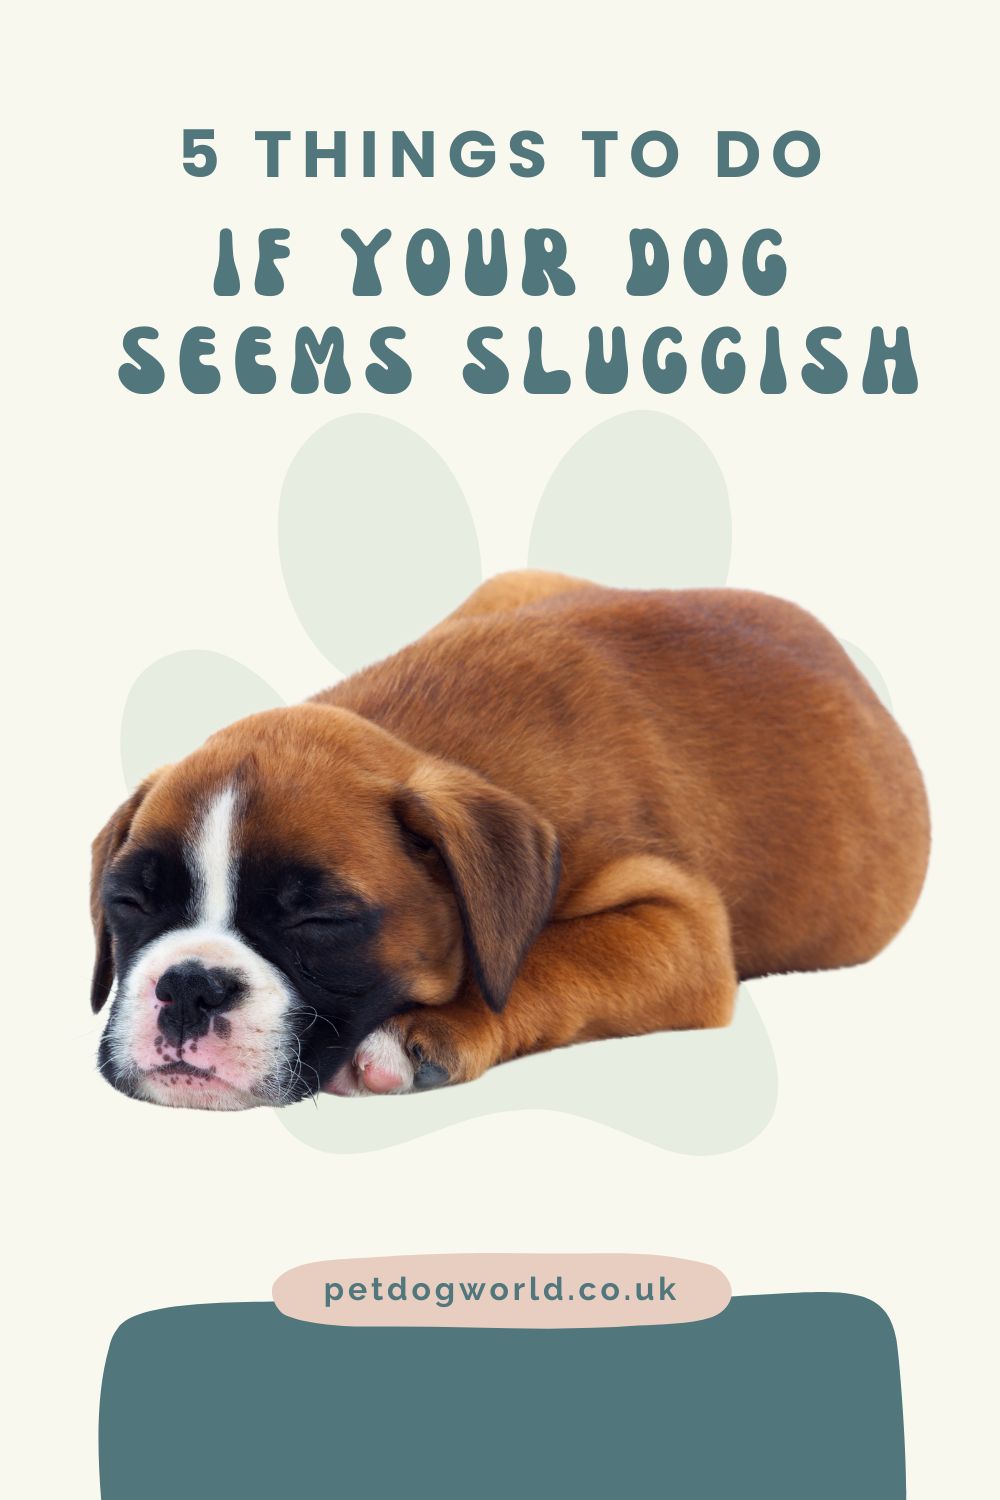 Revive your dog's energy with these 5 fixes for sluggishness. Get them back to their lively self in no time!